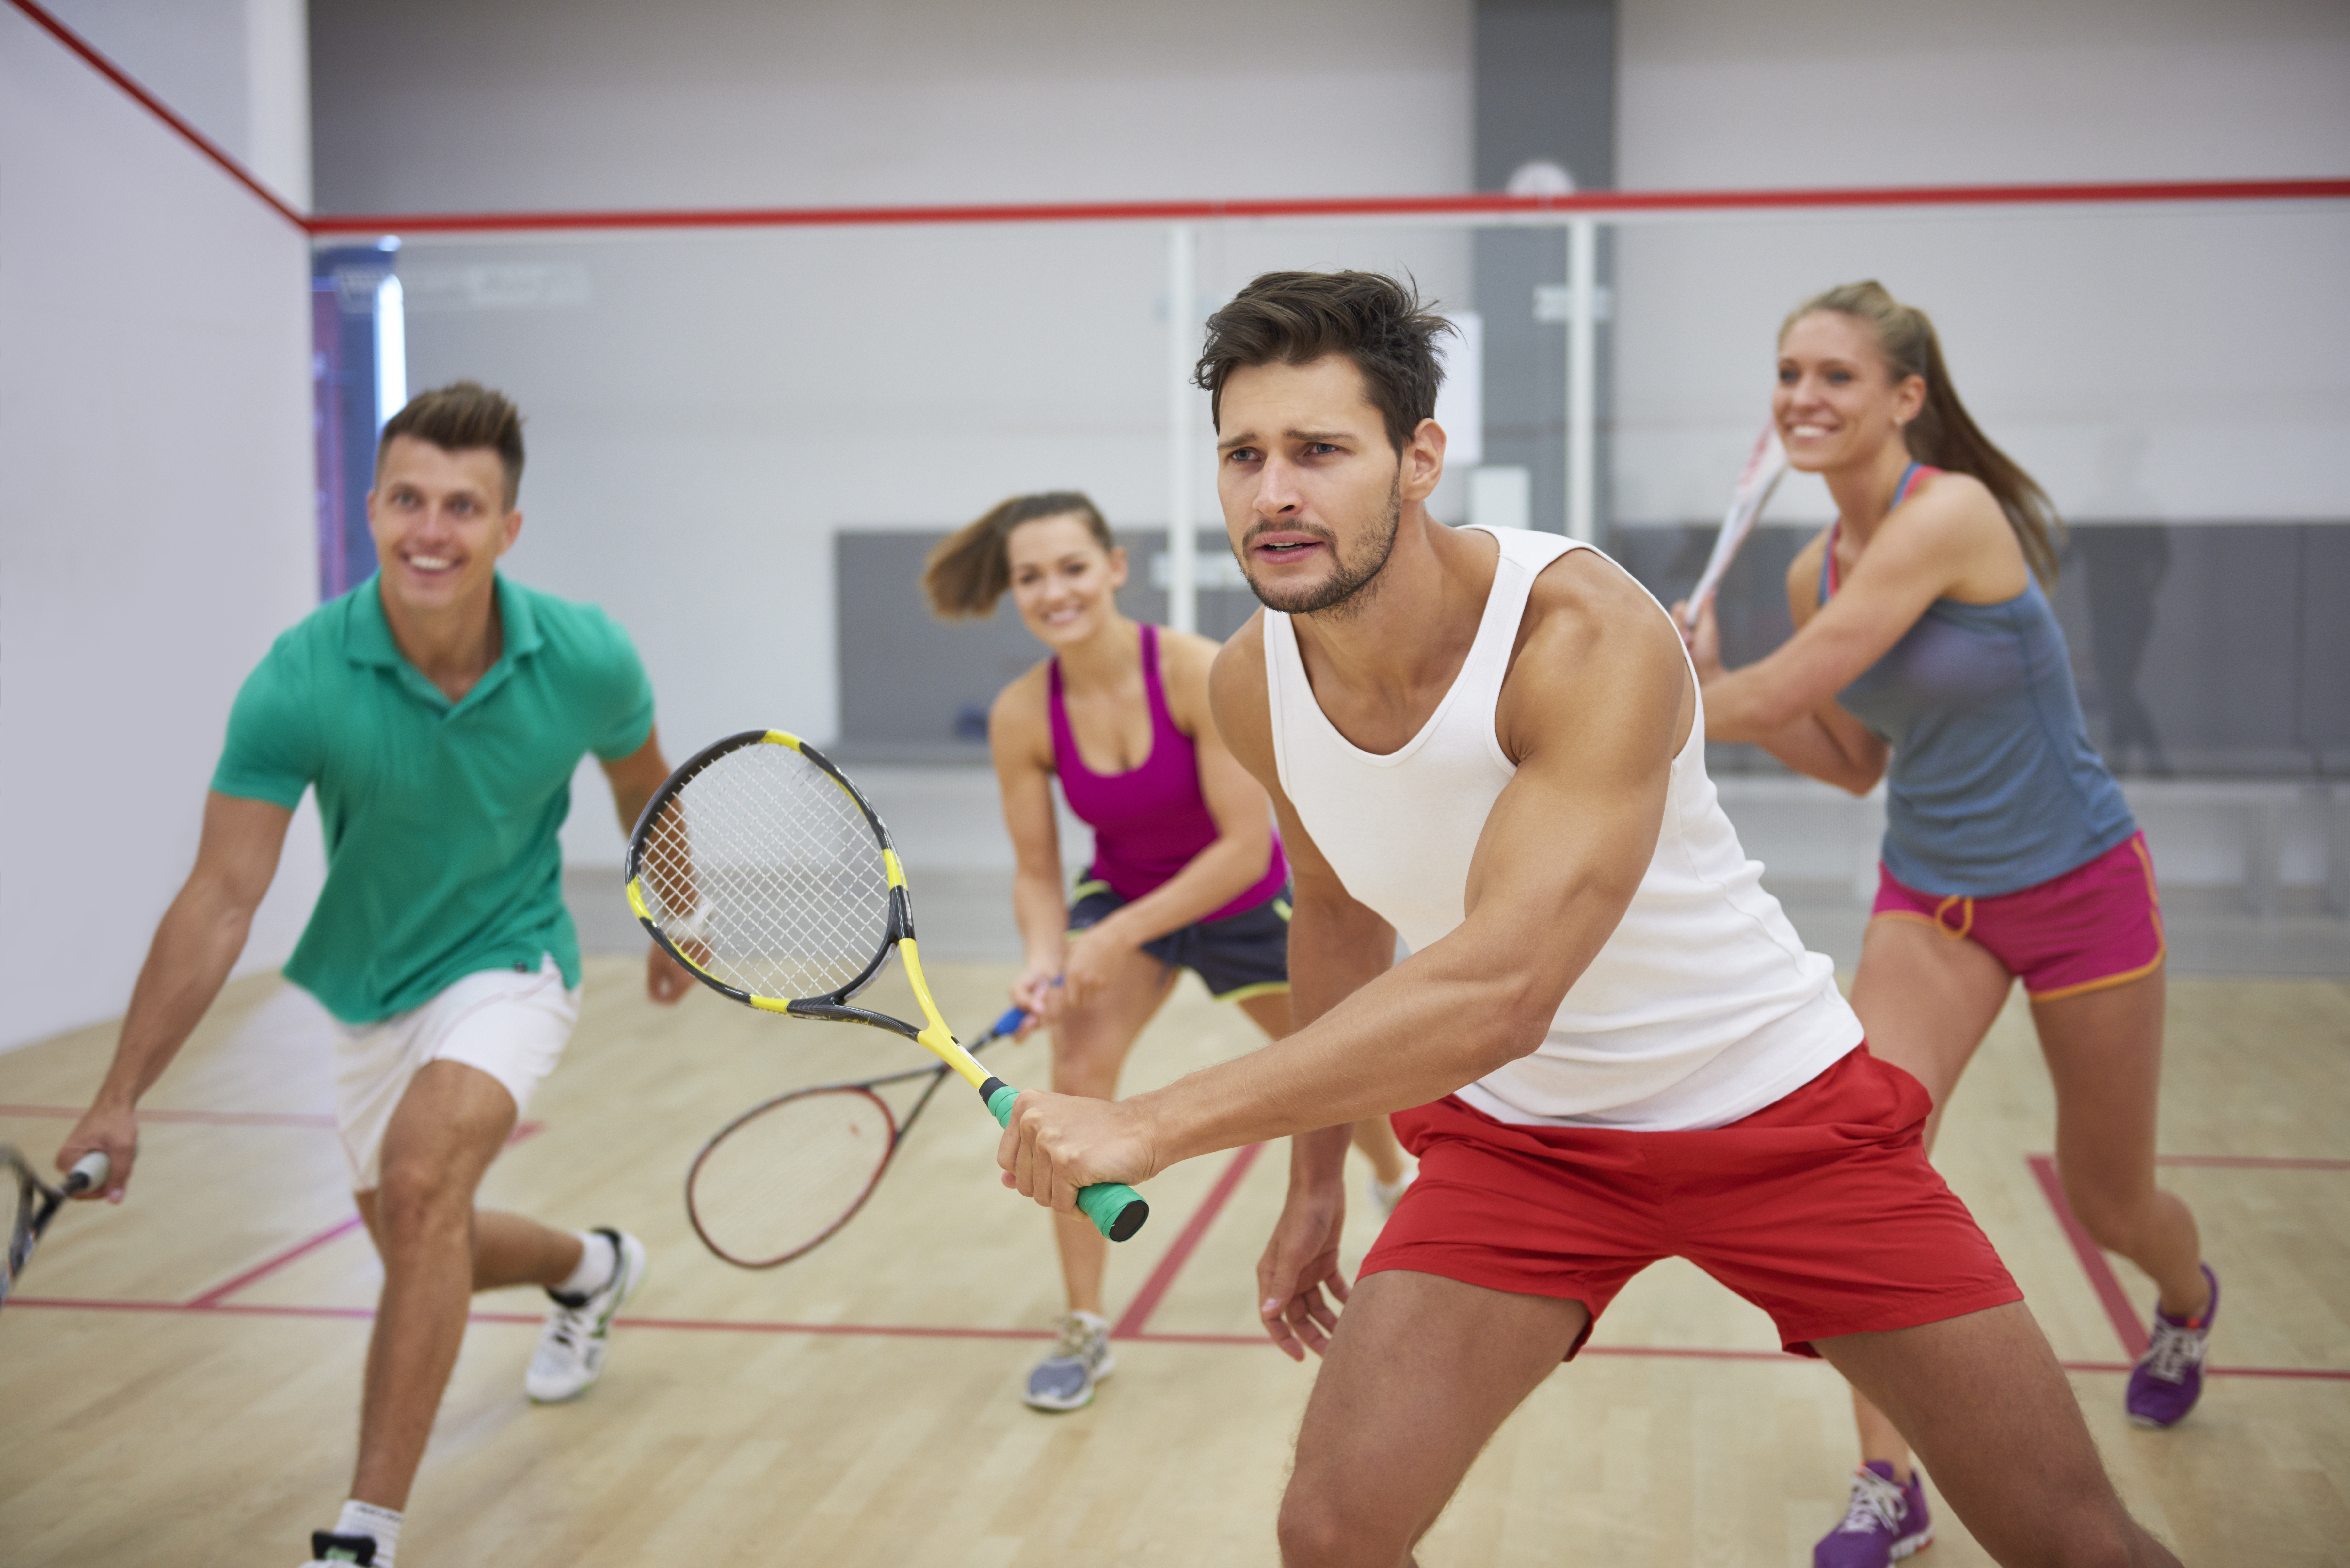 <a href="https://www.freepik.com/free-photo/active-young-people-playing-squash_12930643.htm#from_view=detail_alsolike">Image by gpointstudio</a> on Freepik